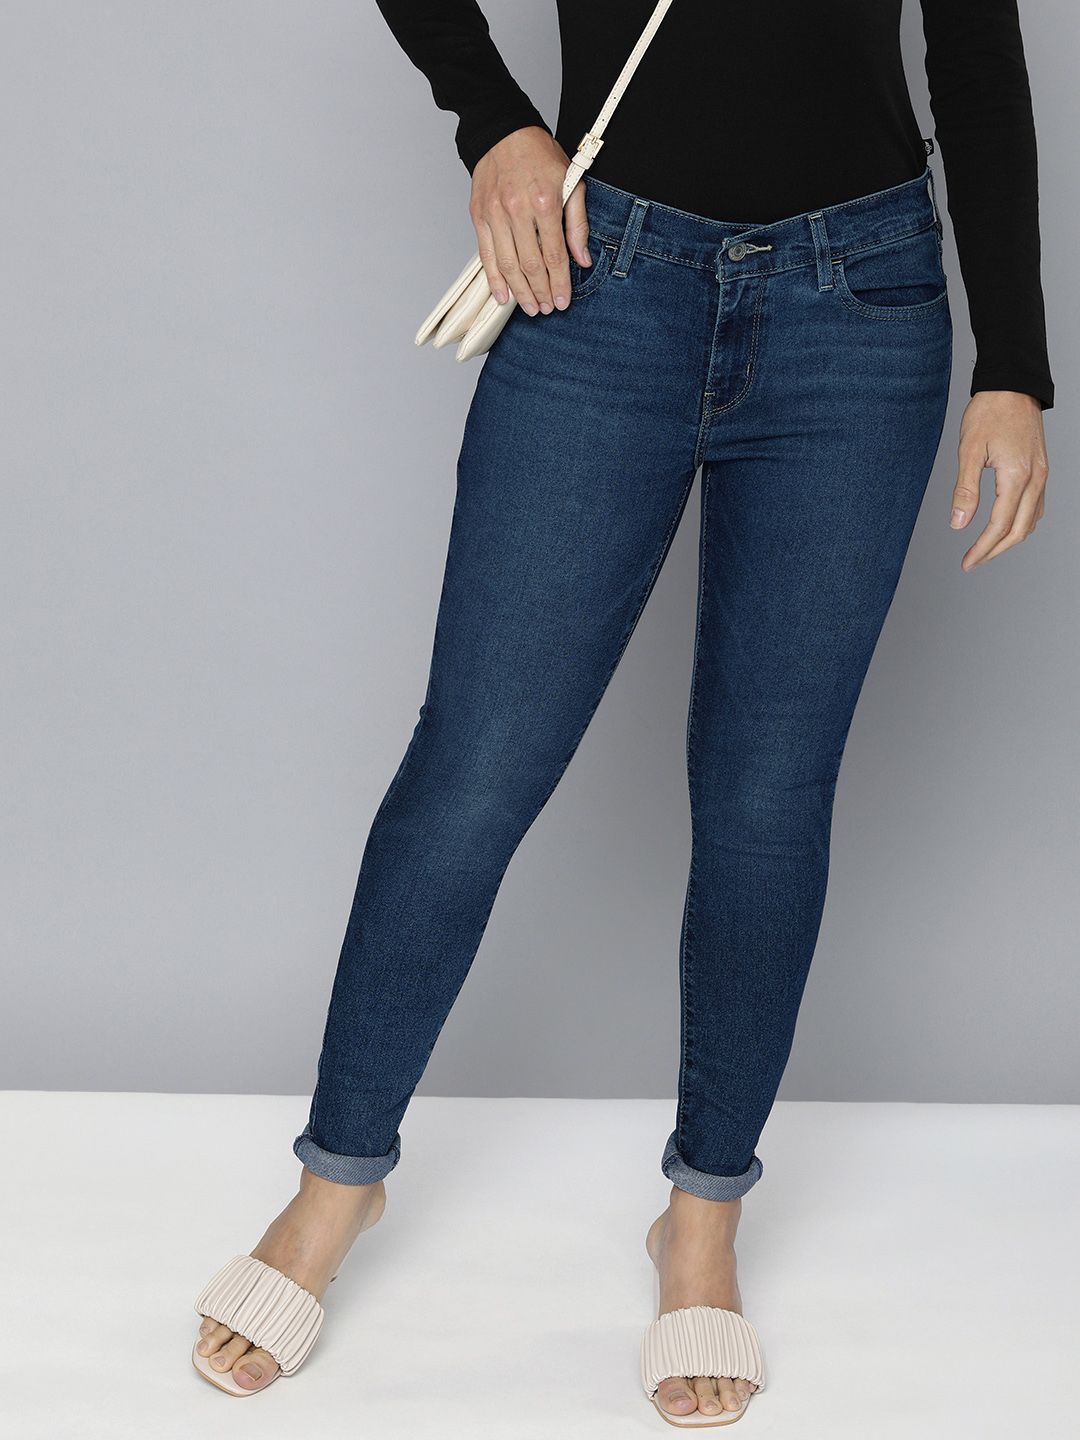 Levis Women Blue Super Skinny Fit Light Fade Stretchable Jeans Price in India